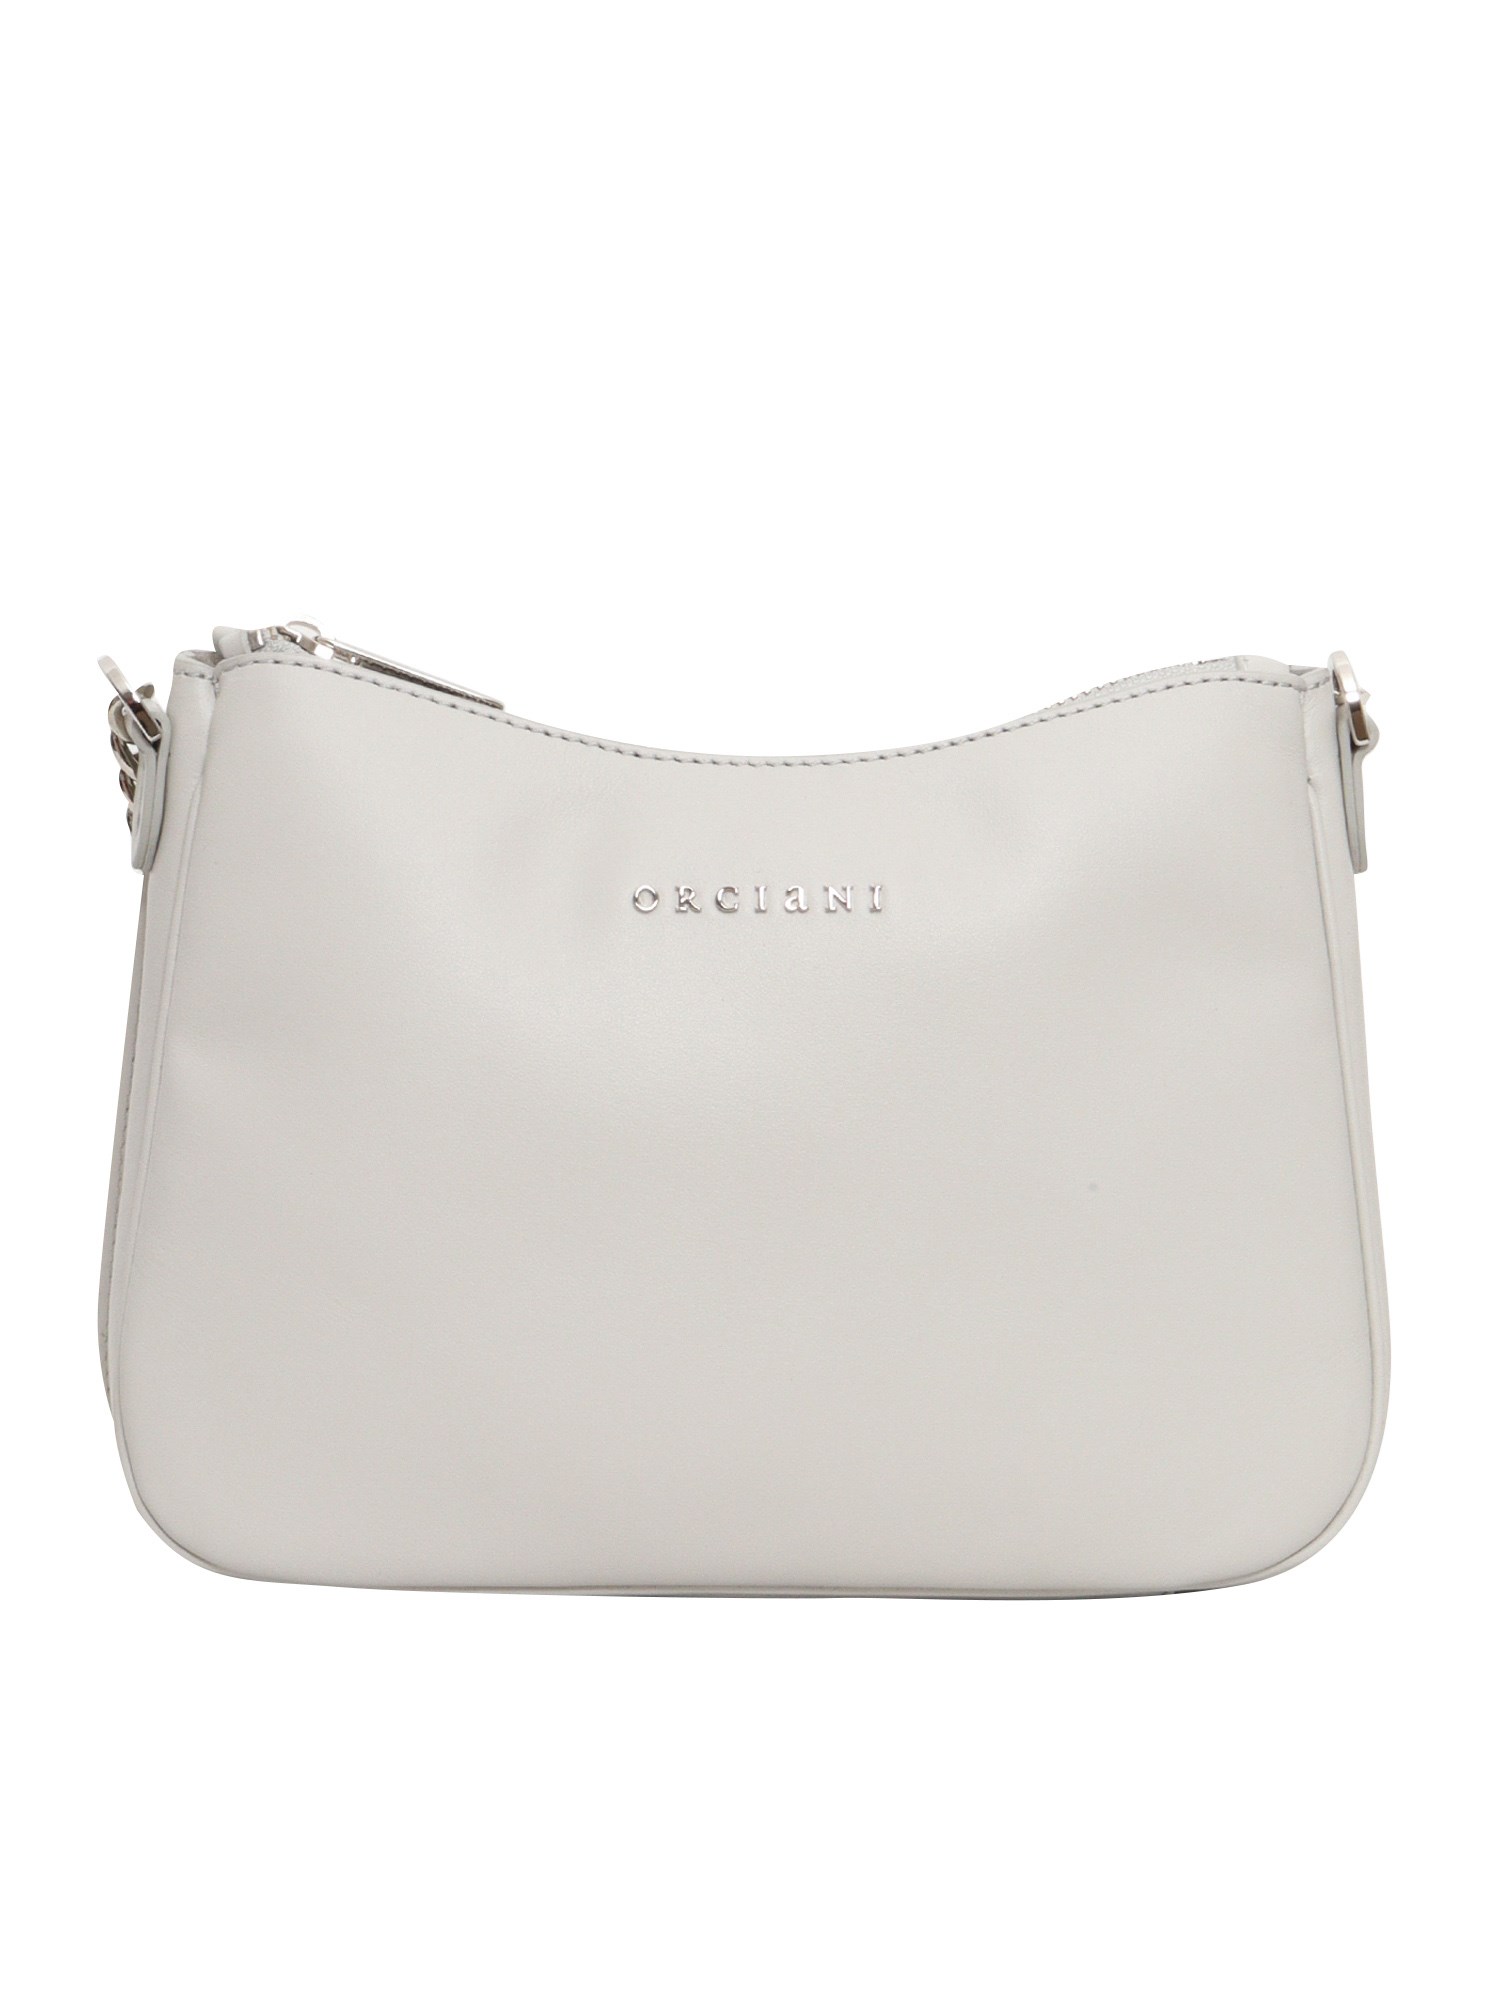 Orciani White Clutch Bag